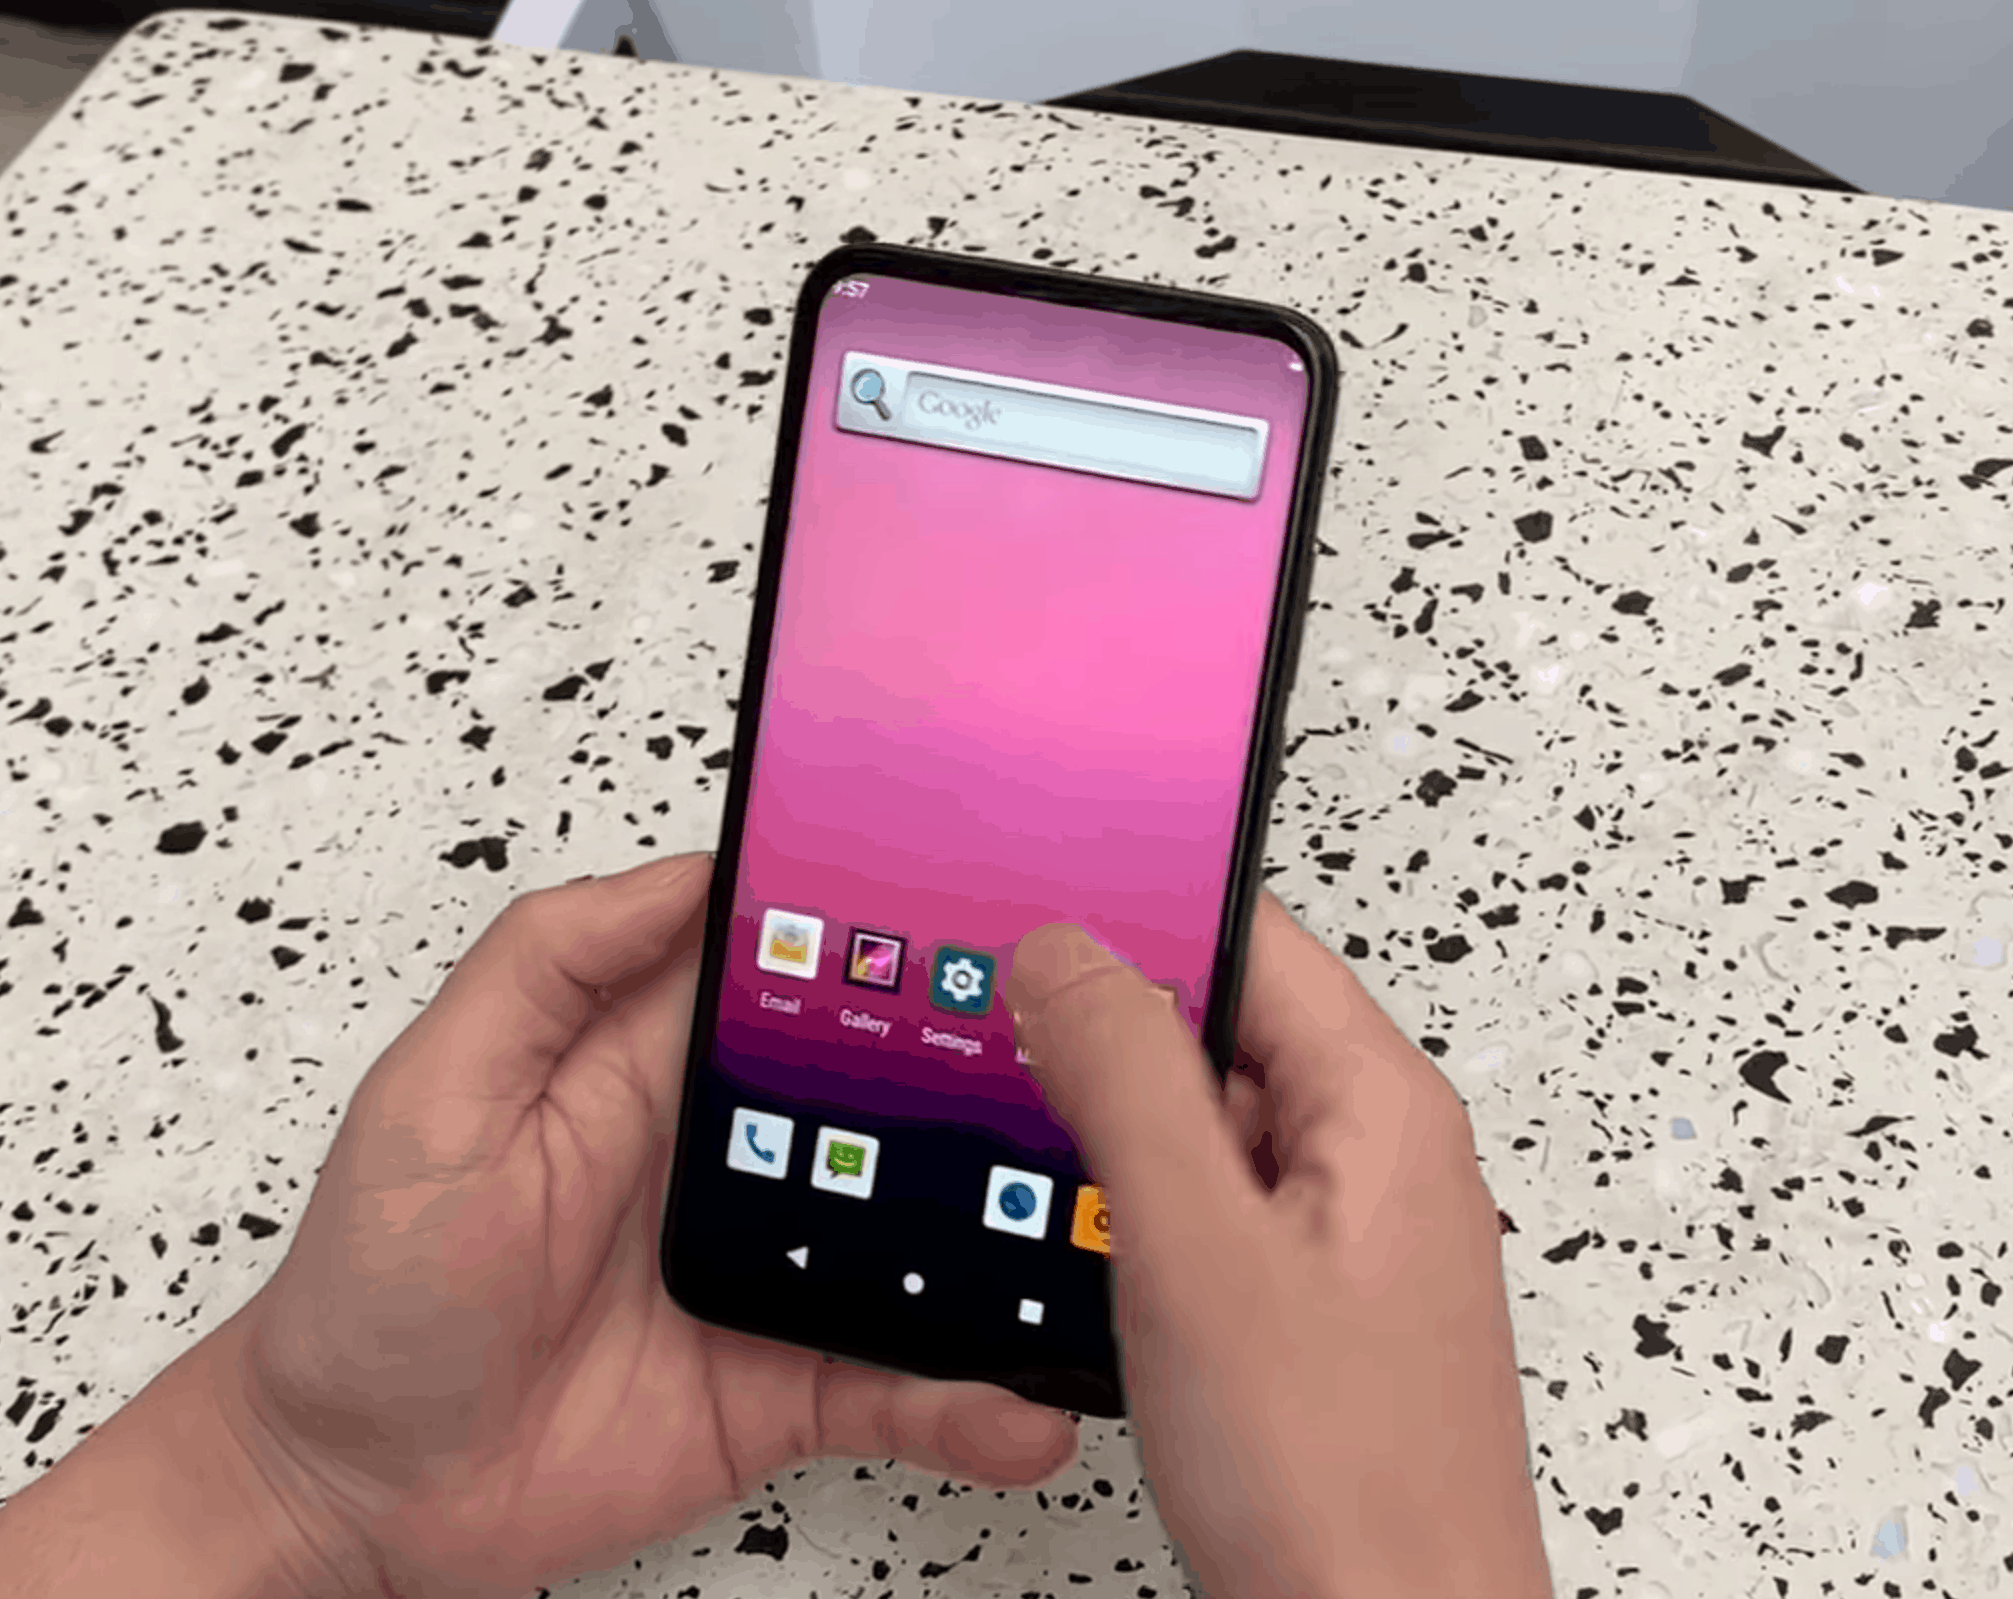 Elephone px with pop-up camera makes another video appearance